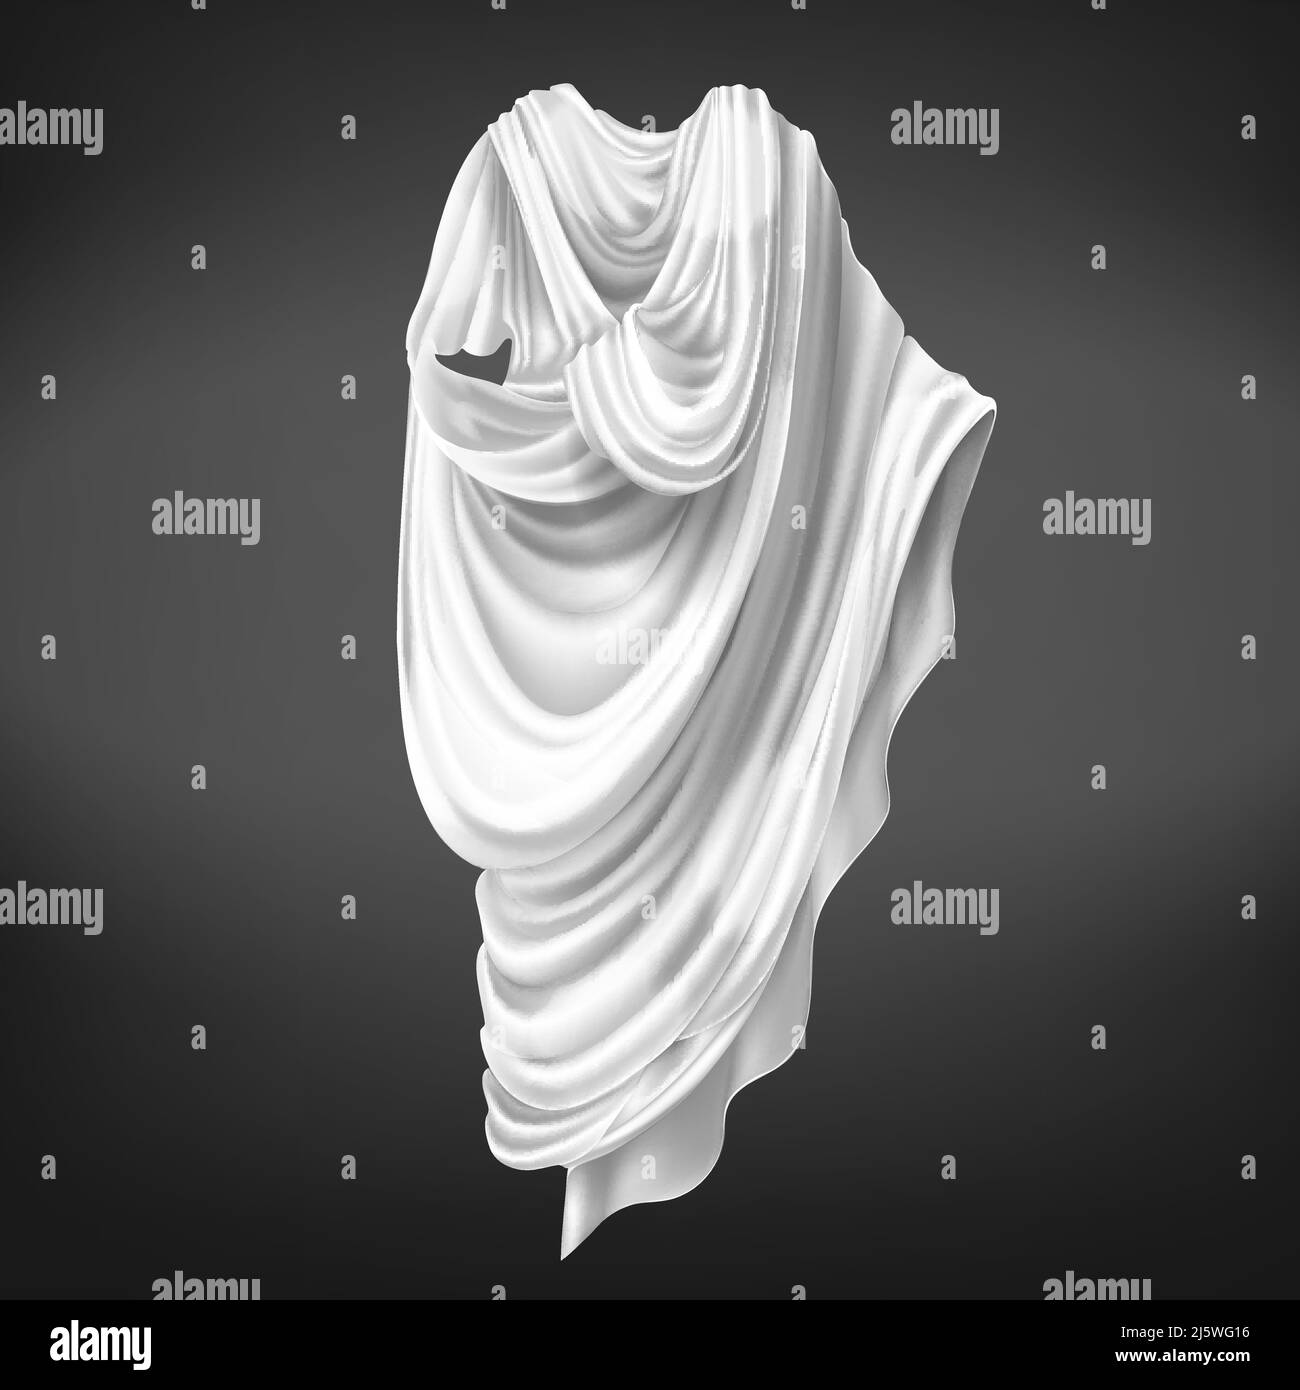 Roman toga isolated on black background. Ancient Rome male citizens outerwear made of white piece of fabric draped around body, folded gown, historica Stock Vector